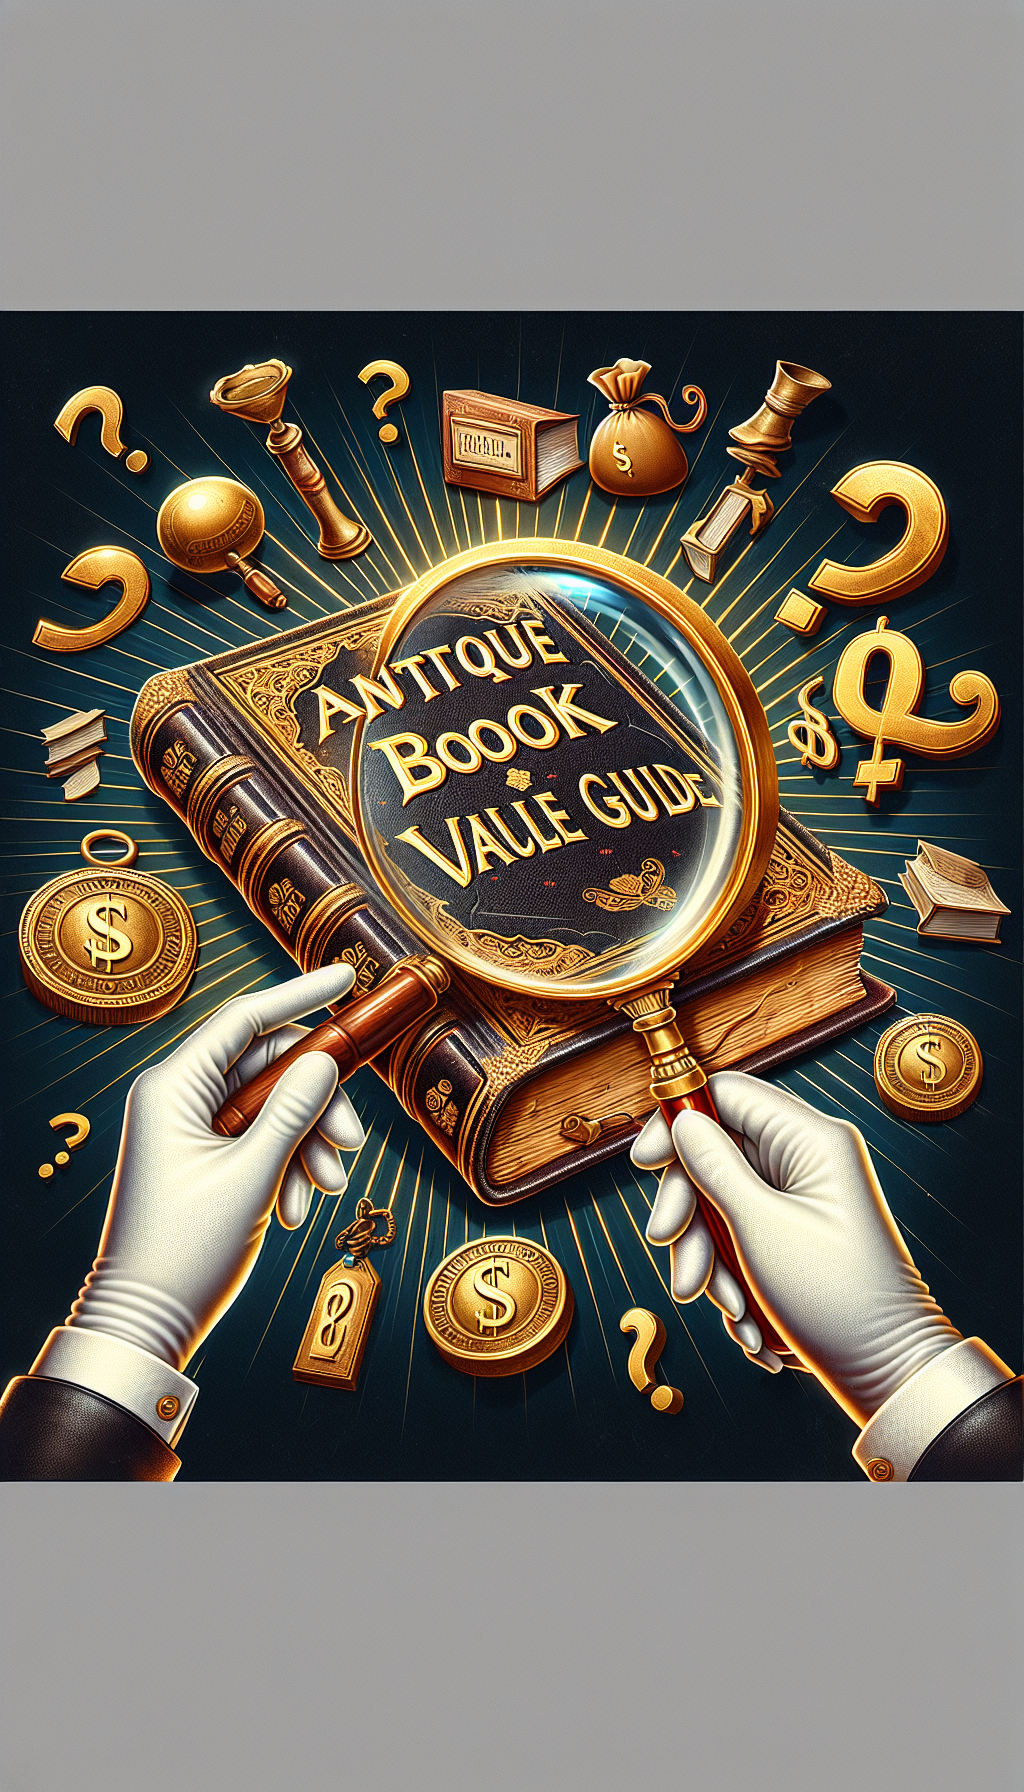 An illustration showcases a magnifying glass hovering over a vintage, leather-bound tome with the title "Antique Book Value Guide" embossed in gold. Inspector-style hands, adorned with white gloves, are examining the pages, with whimsical, floating symbols like question marks, authentication stamps, and dollar signs mingling with drawn rays implying the scrutiny process for authenticity and value.